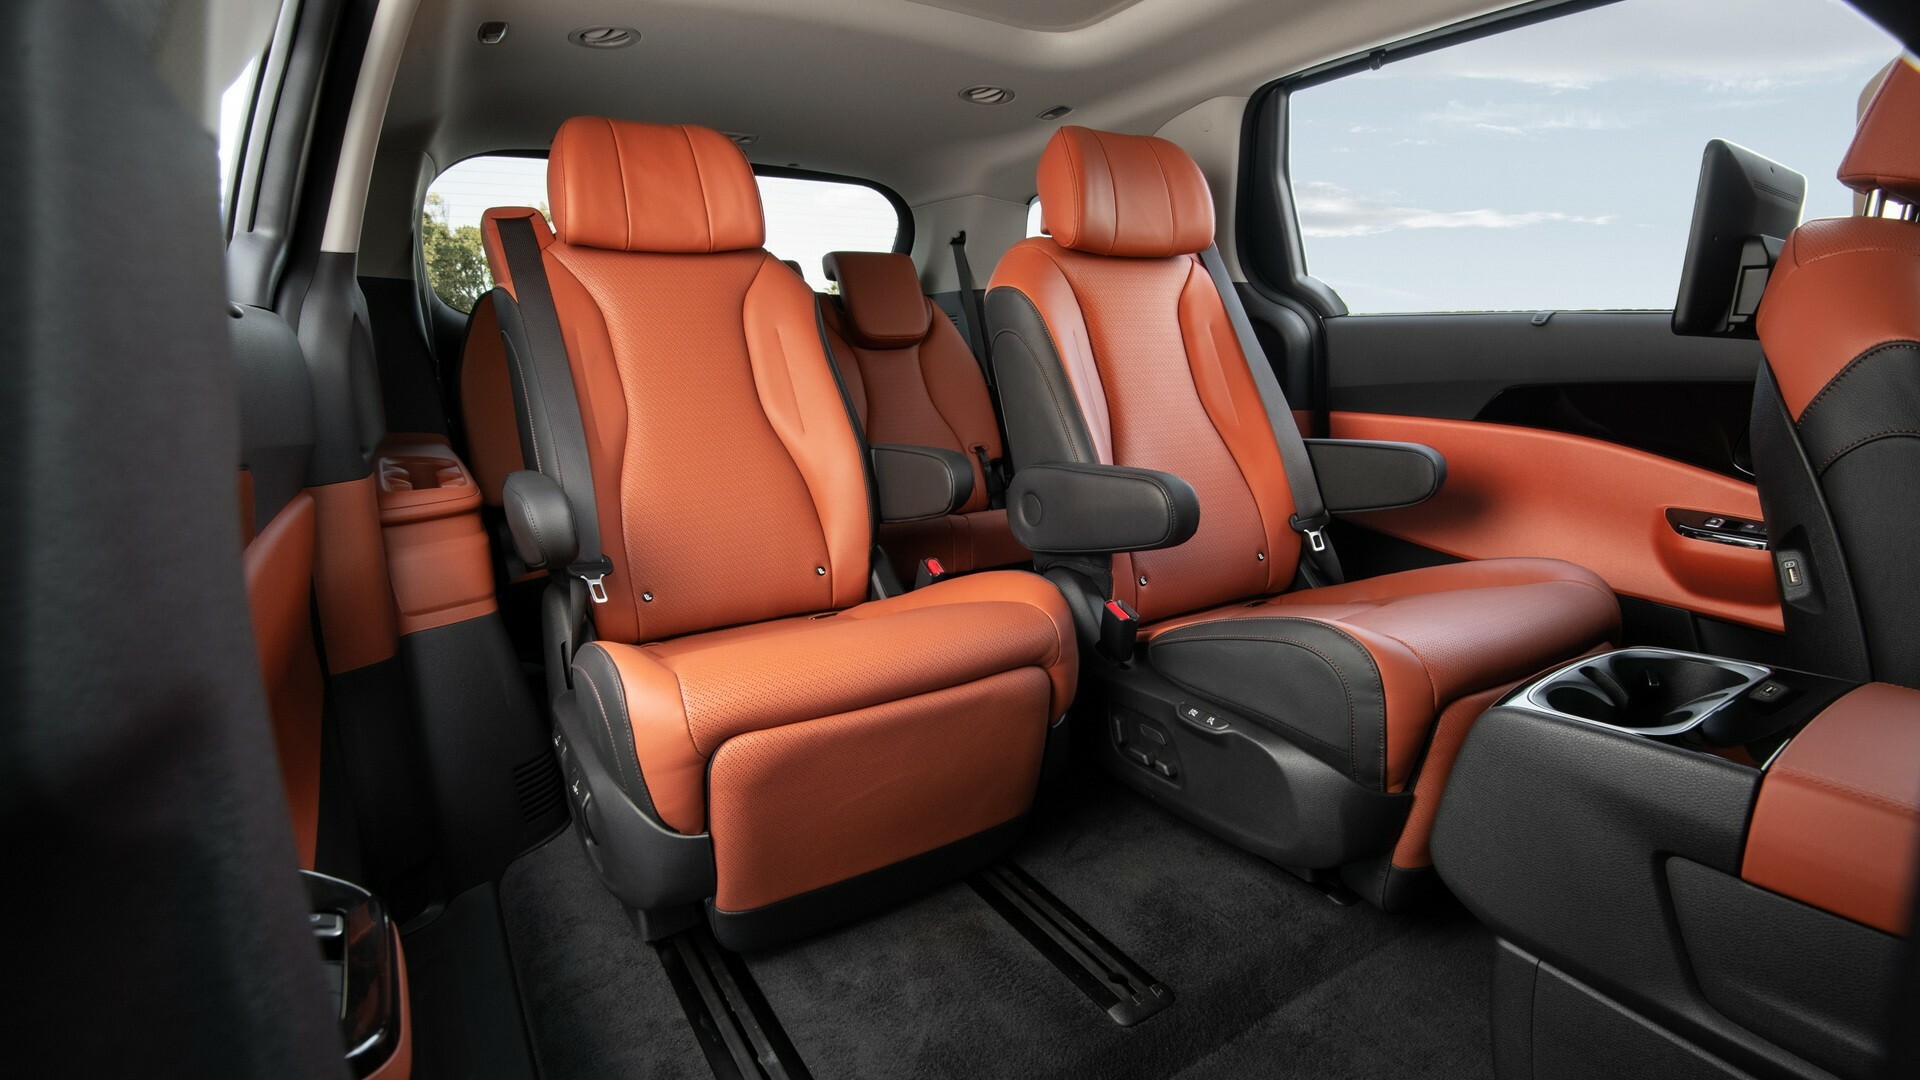 Which Vehicle Has the Most Comfortable Seats?